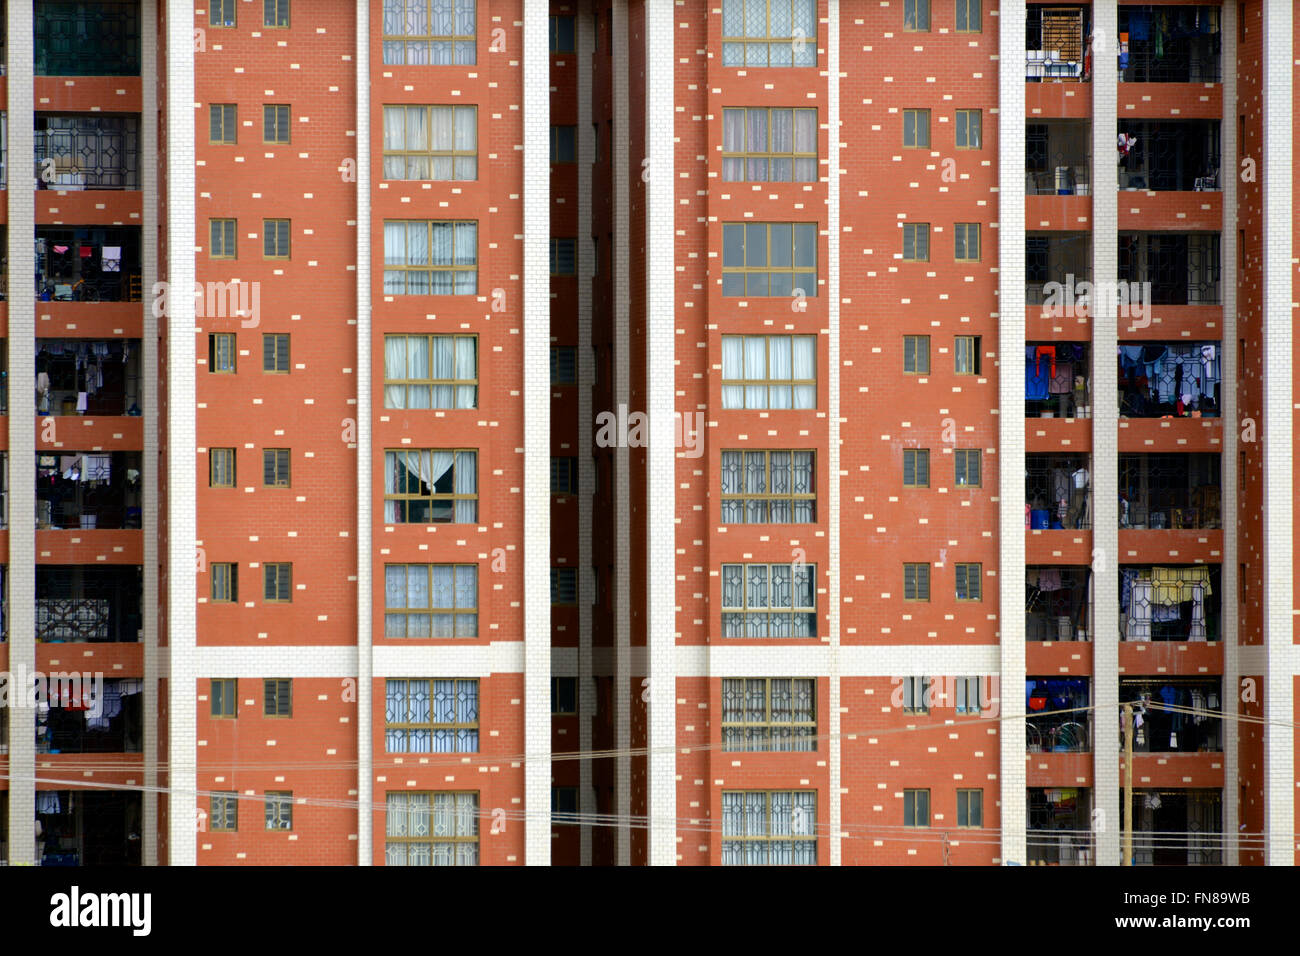 AFRICA: KENYA: A high rise building in the centre of the city of Nairobi Stock Photo